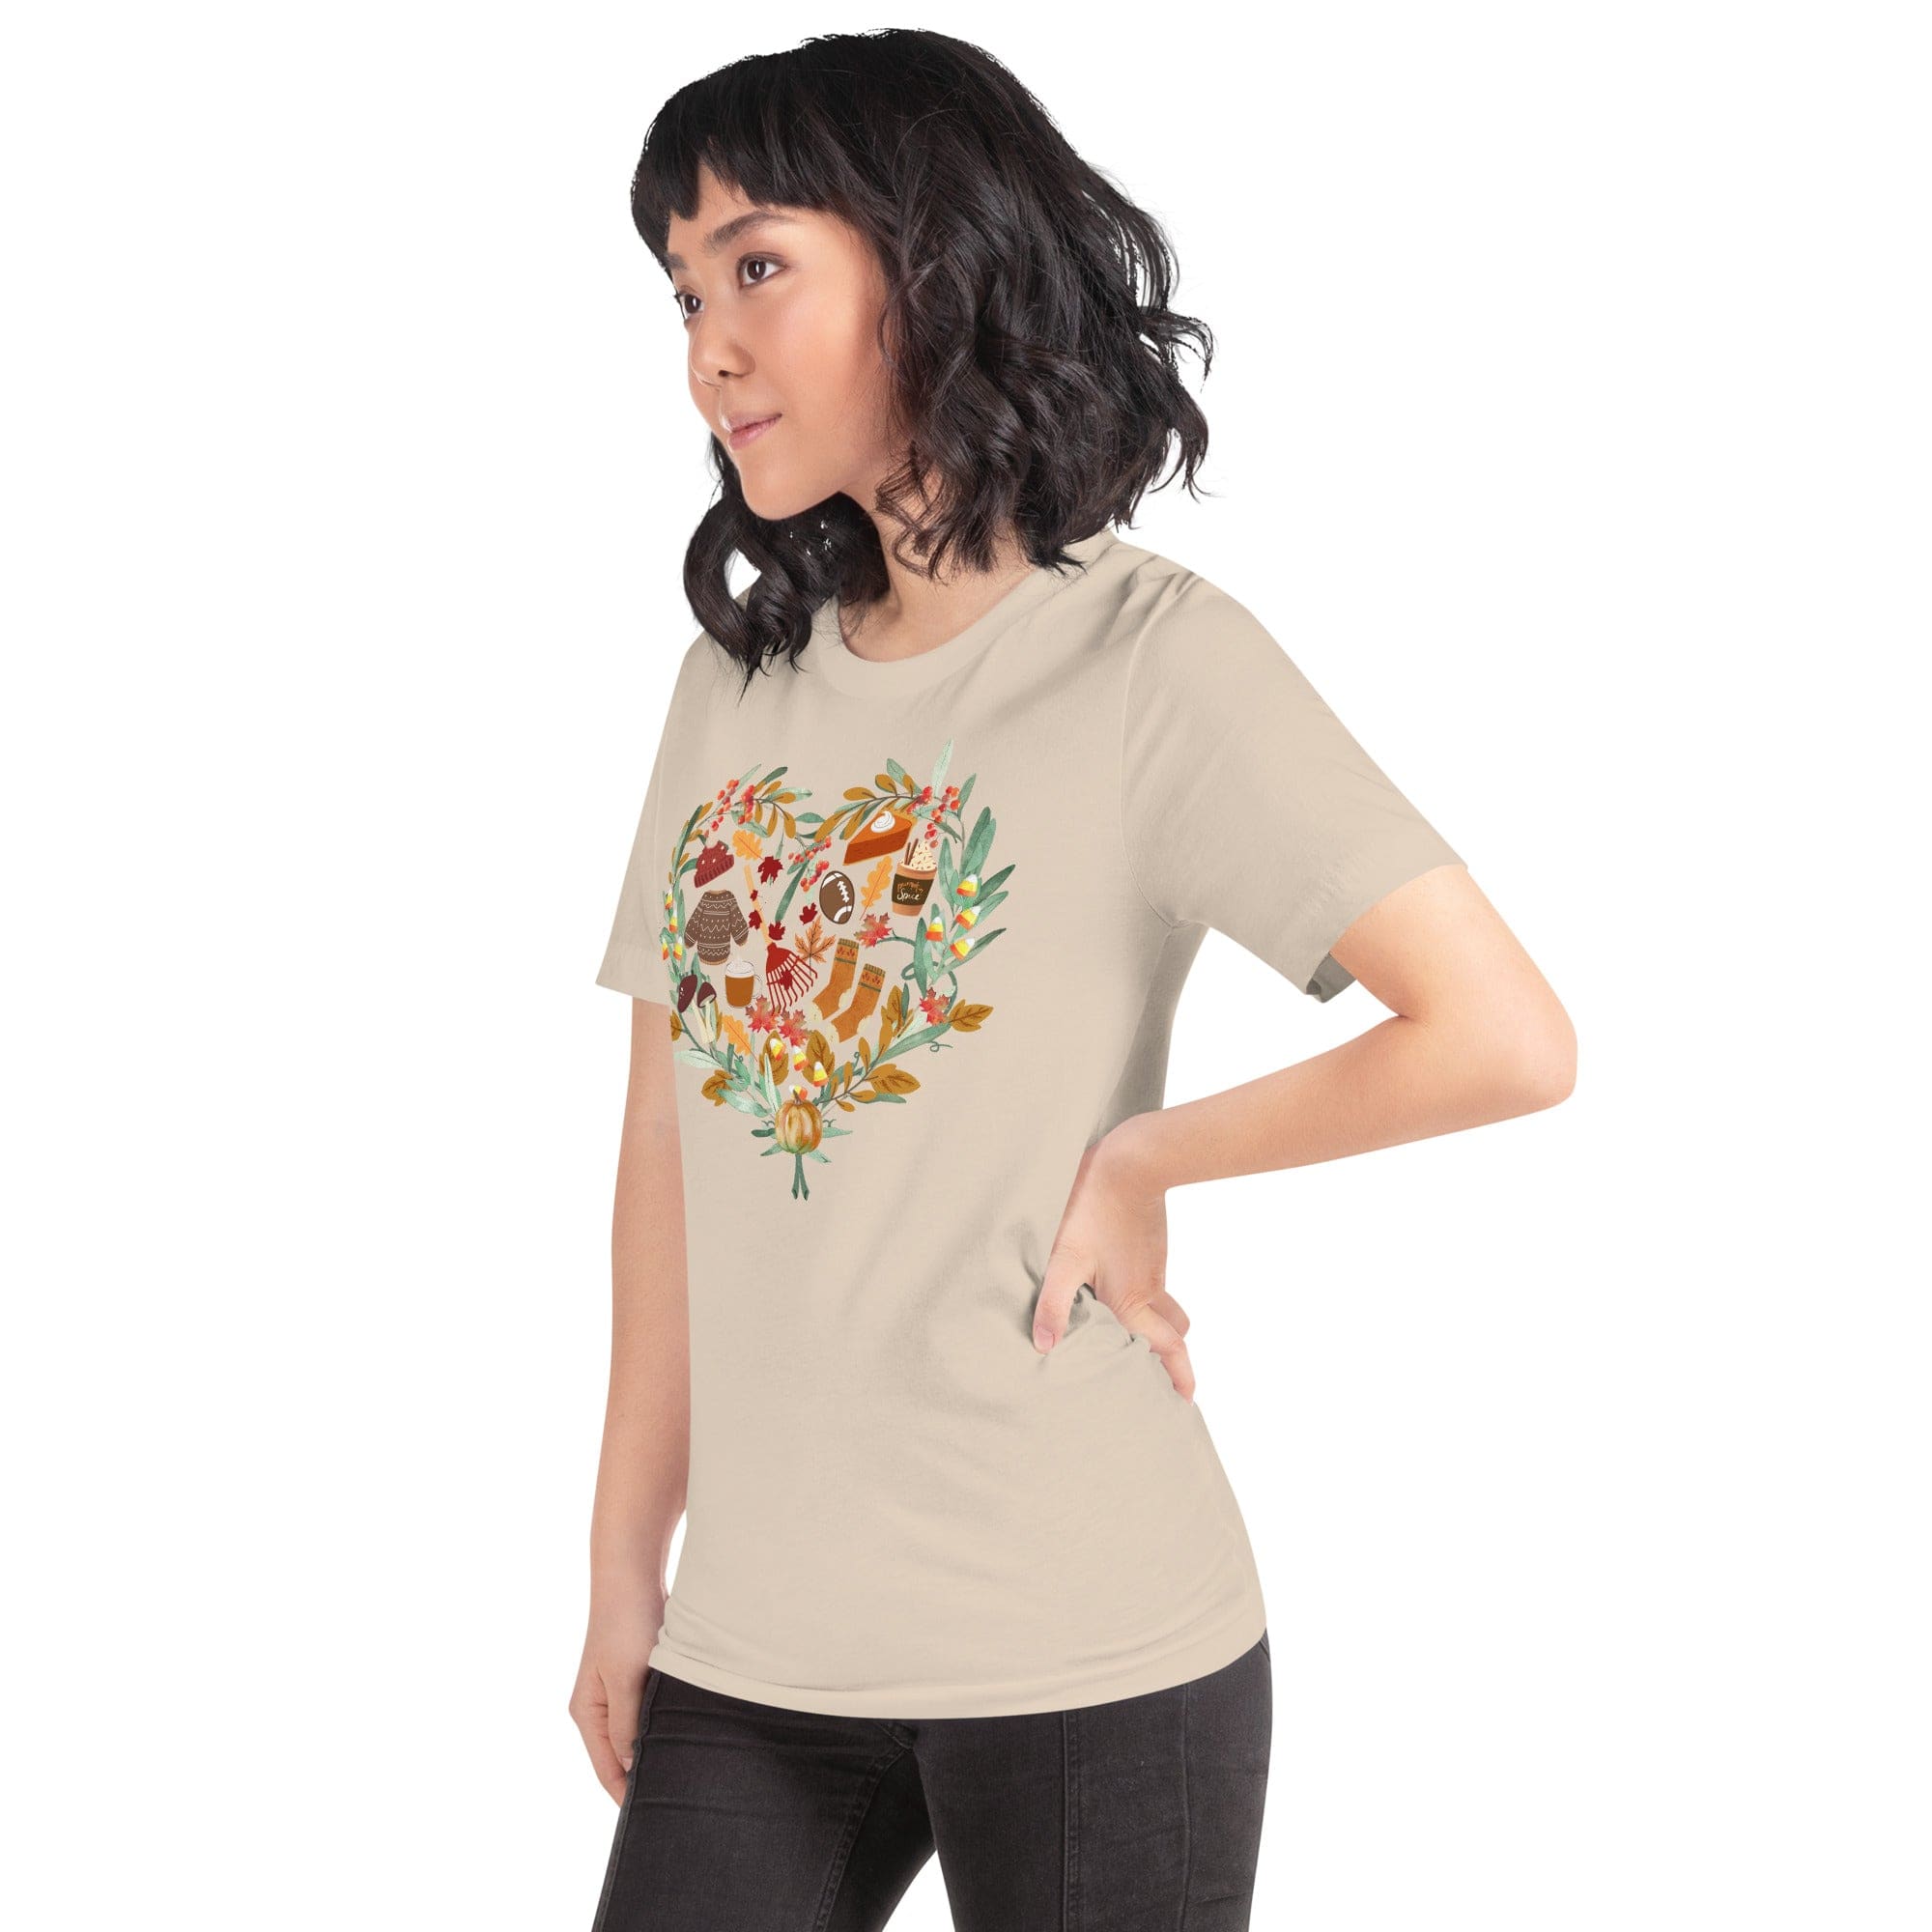 Spruced Roost T-Shirts Autumn Medley T-Shirt Crew Neck - XS-3XL